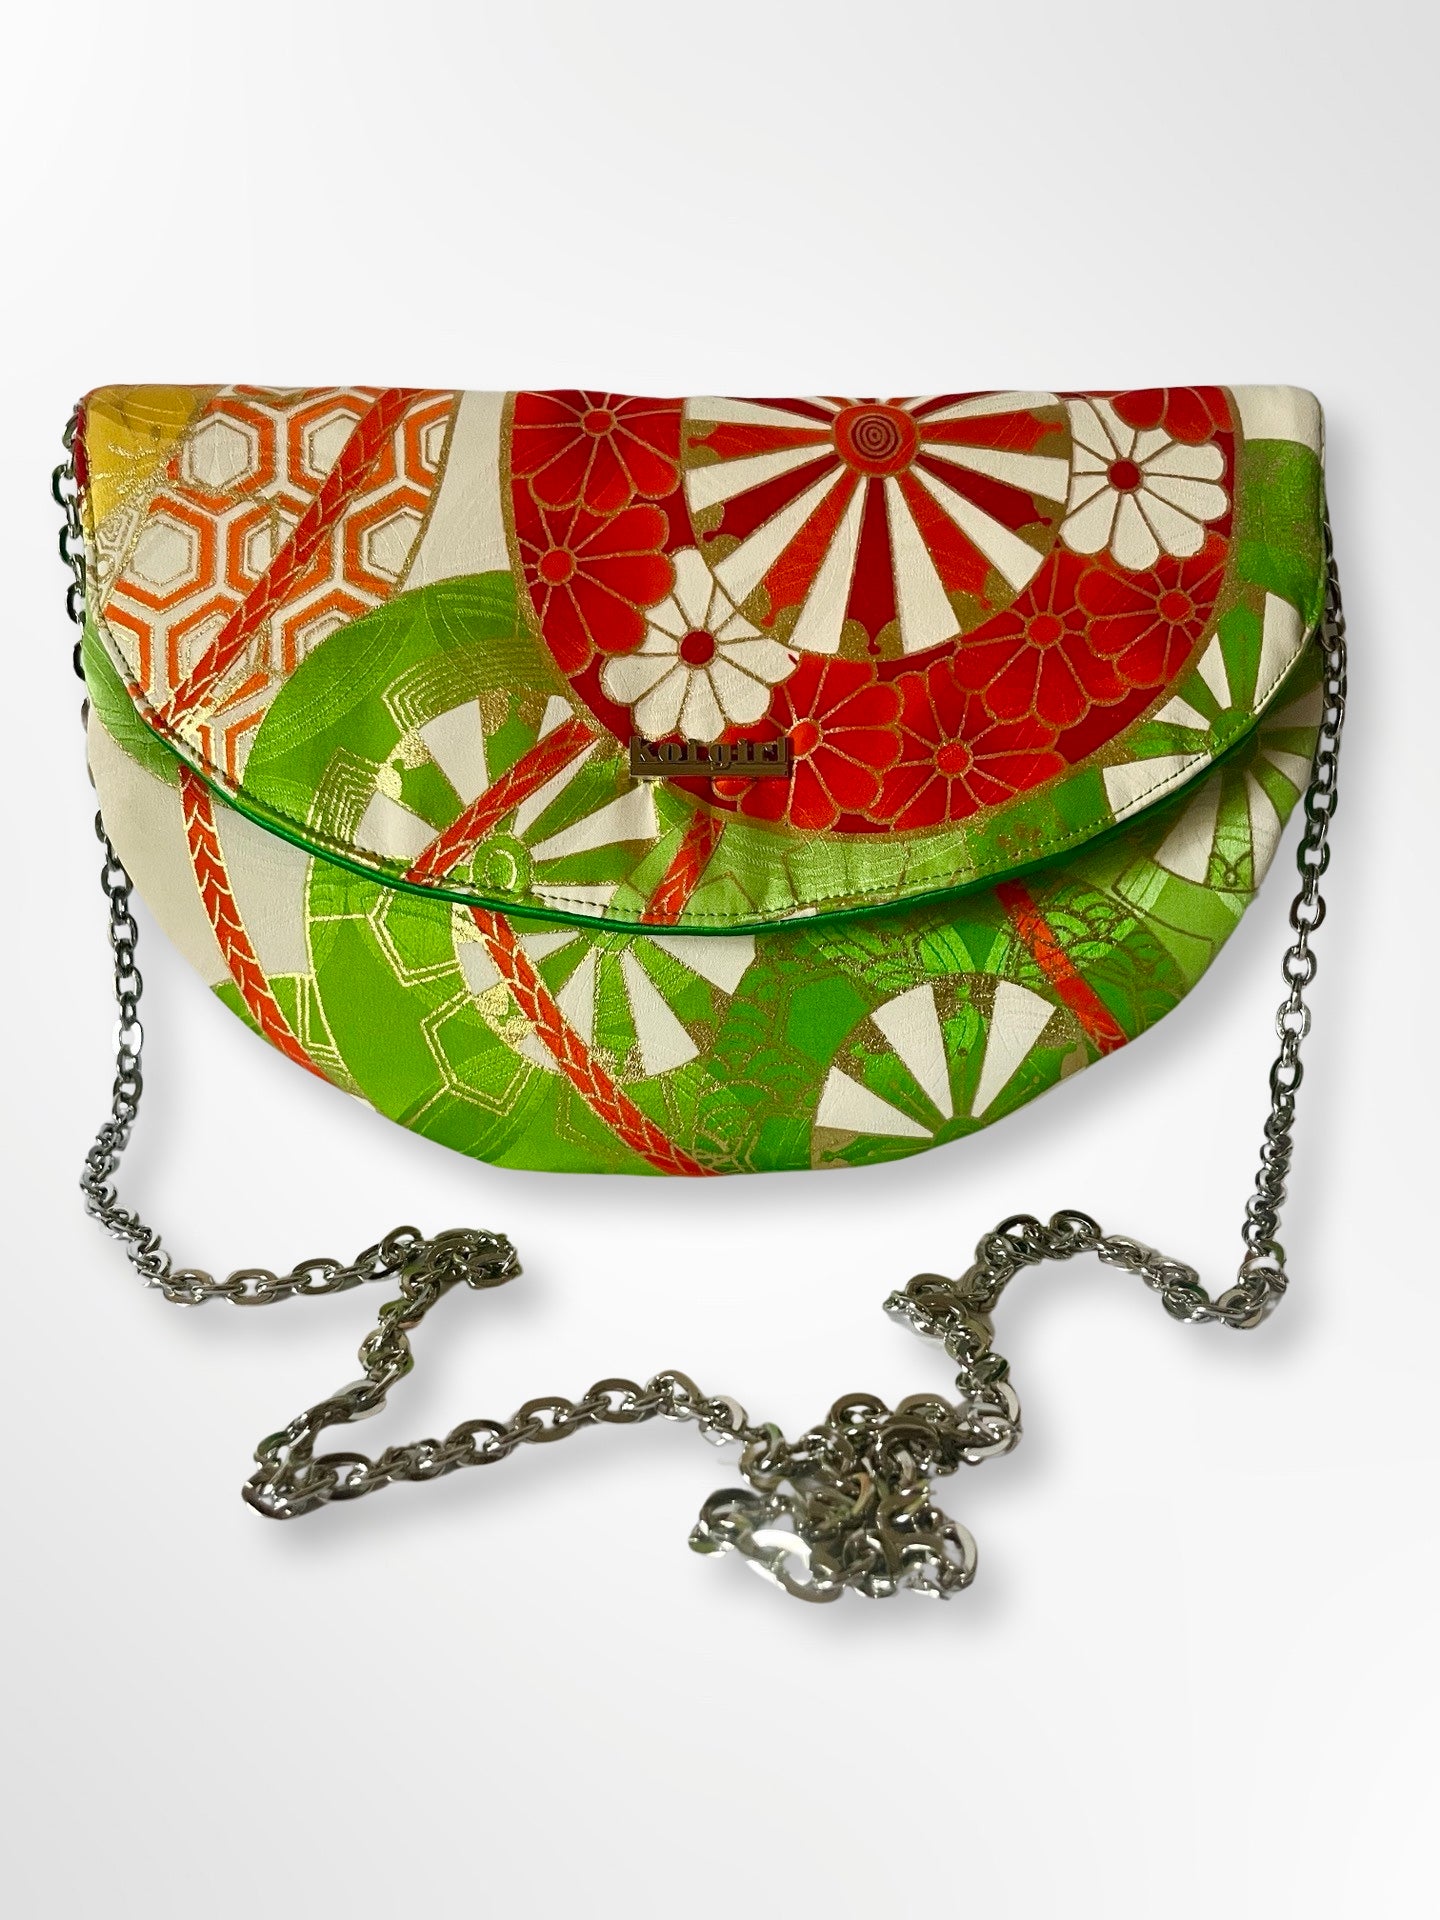 Blossoms and Wheels Clutch